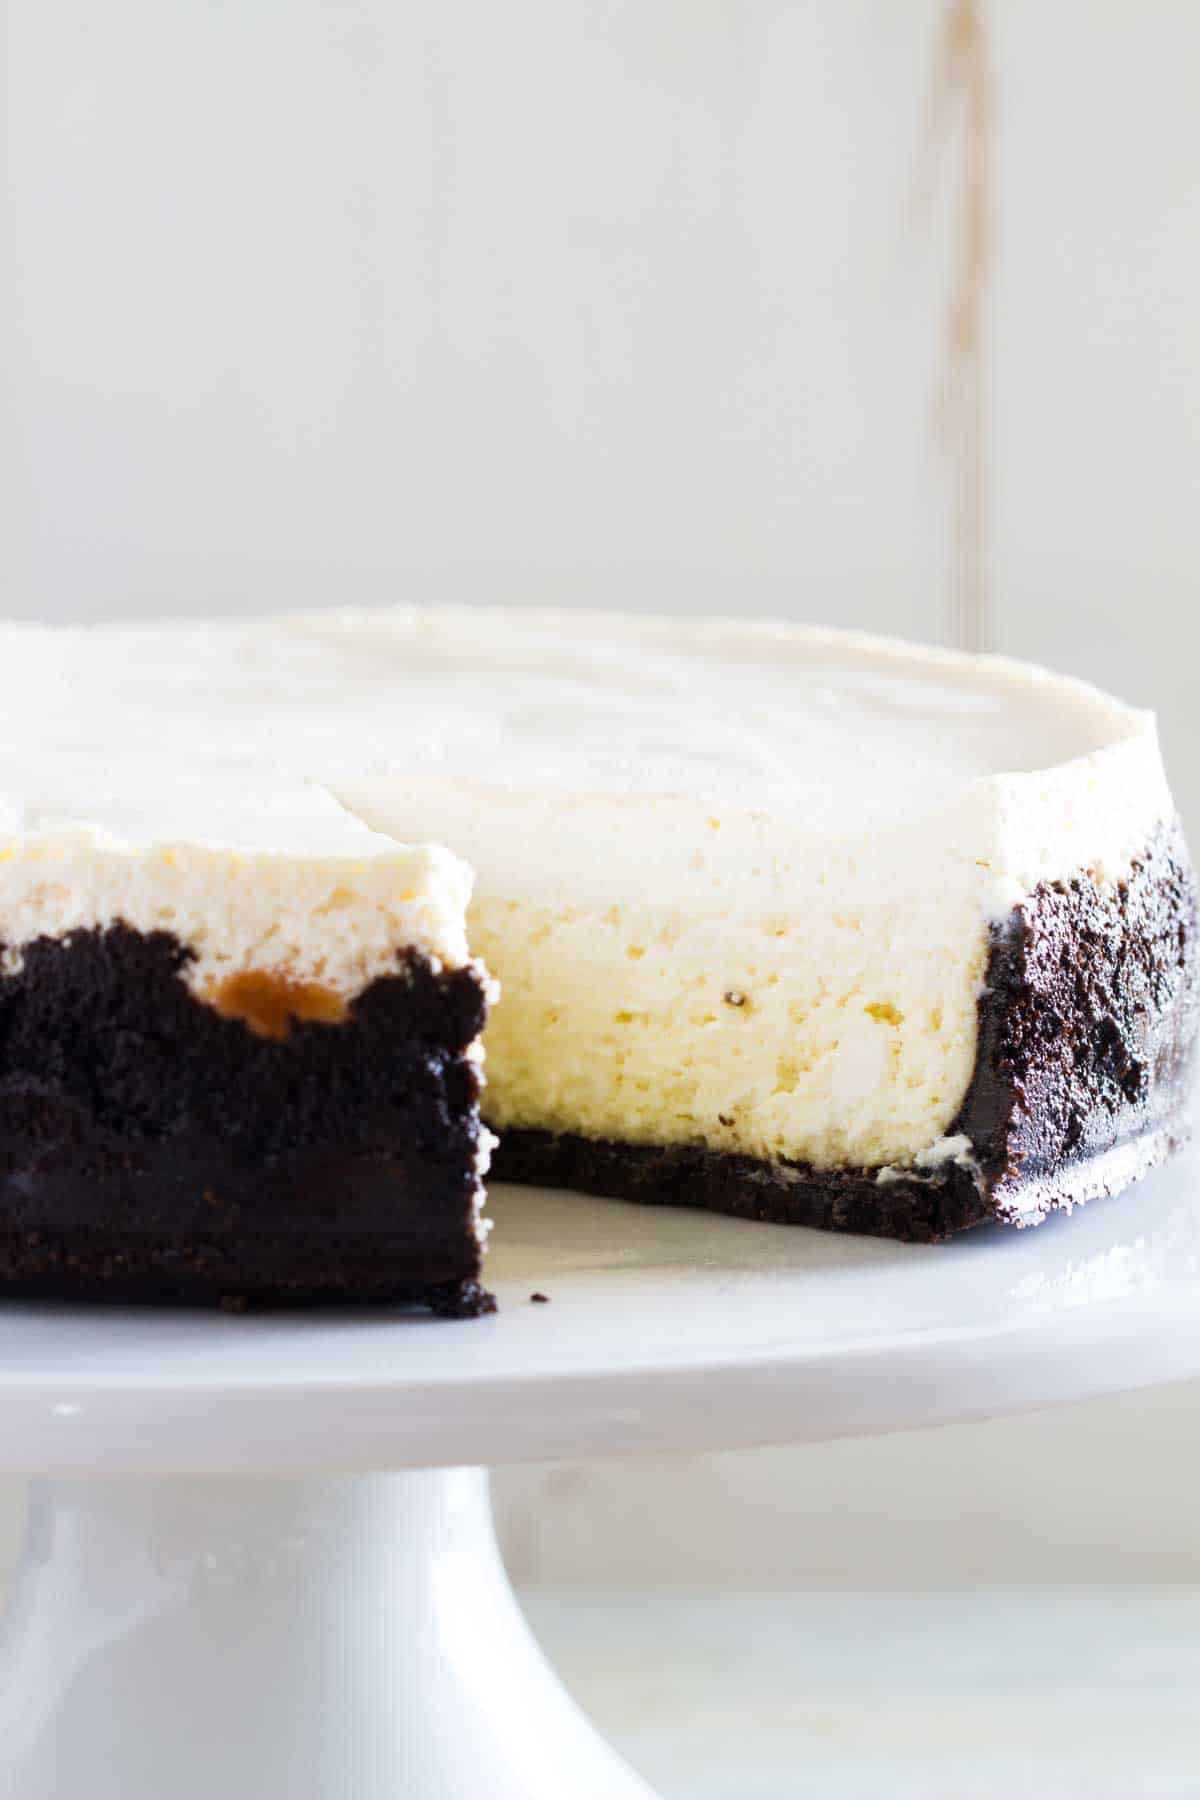 full sour cream cheesecake with a slice taken from it.